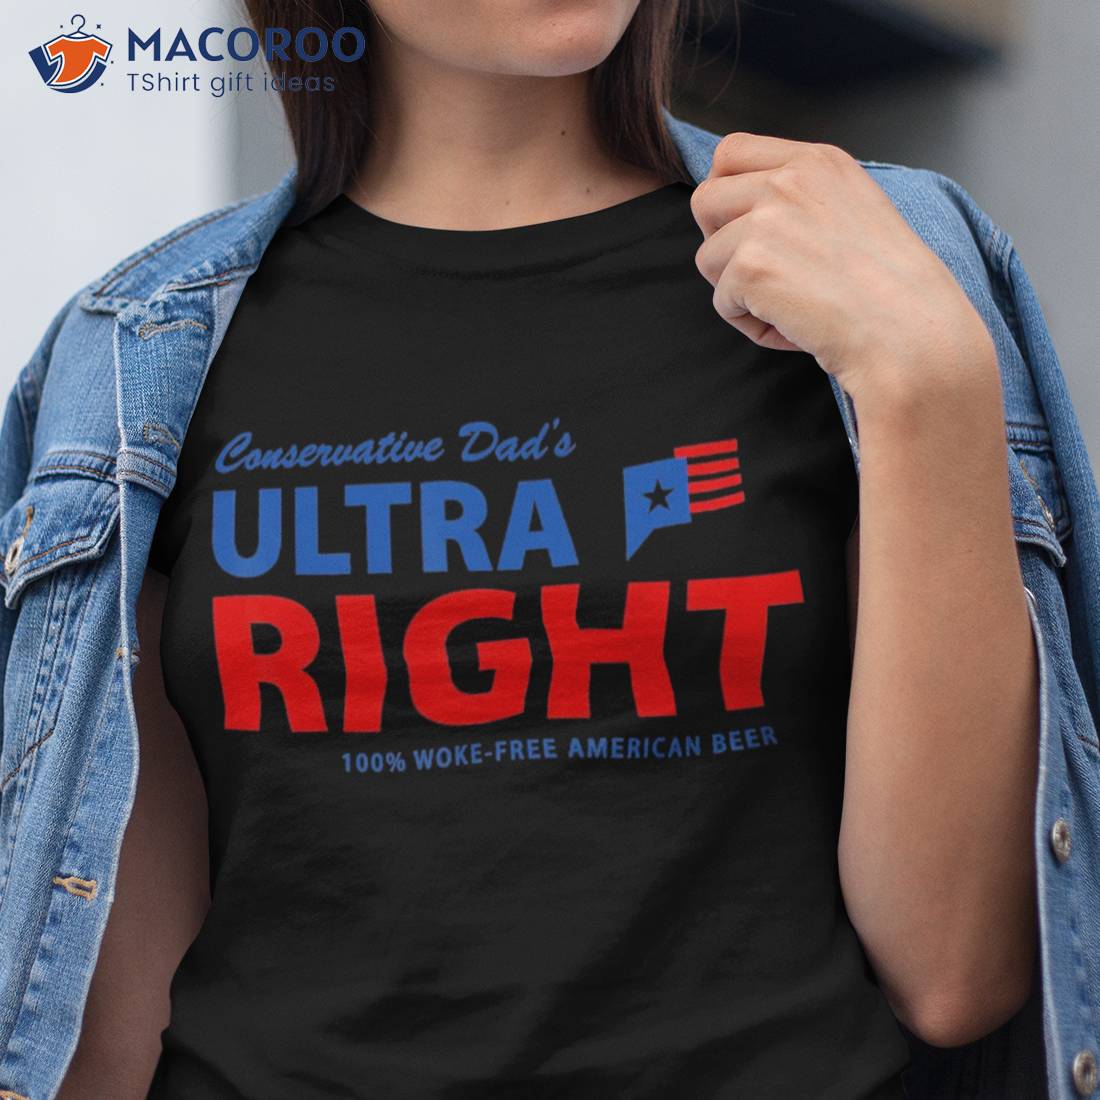 Personable, Conservative, Printing T-shirt Design for a Company by